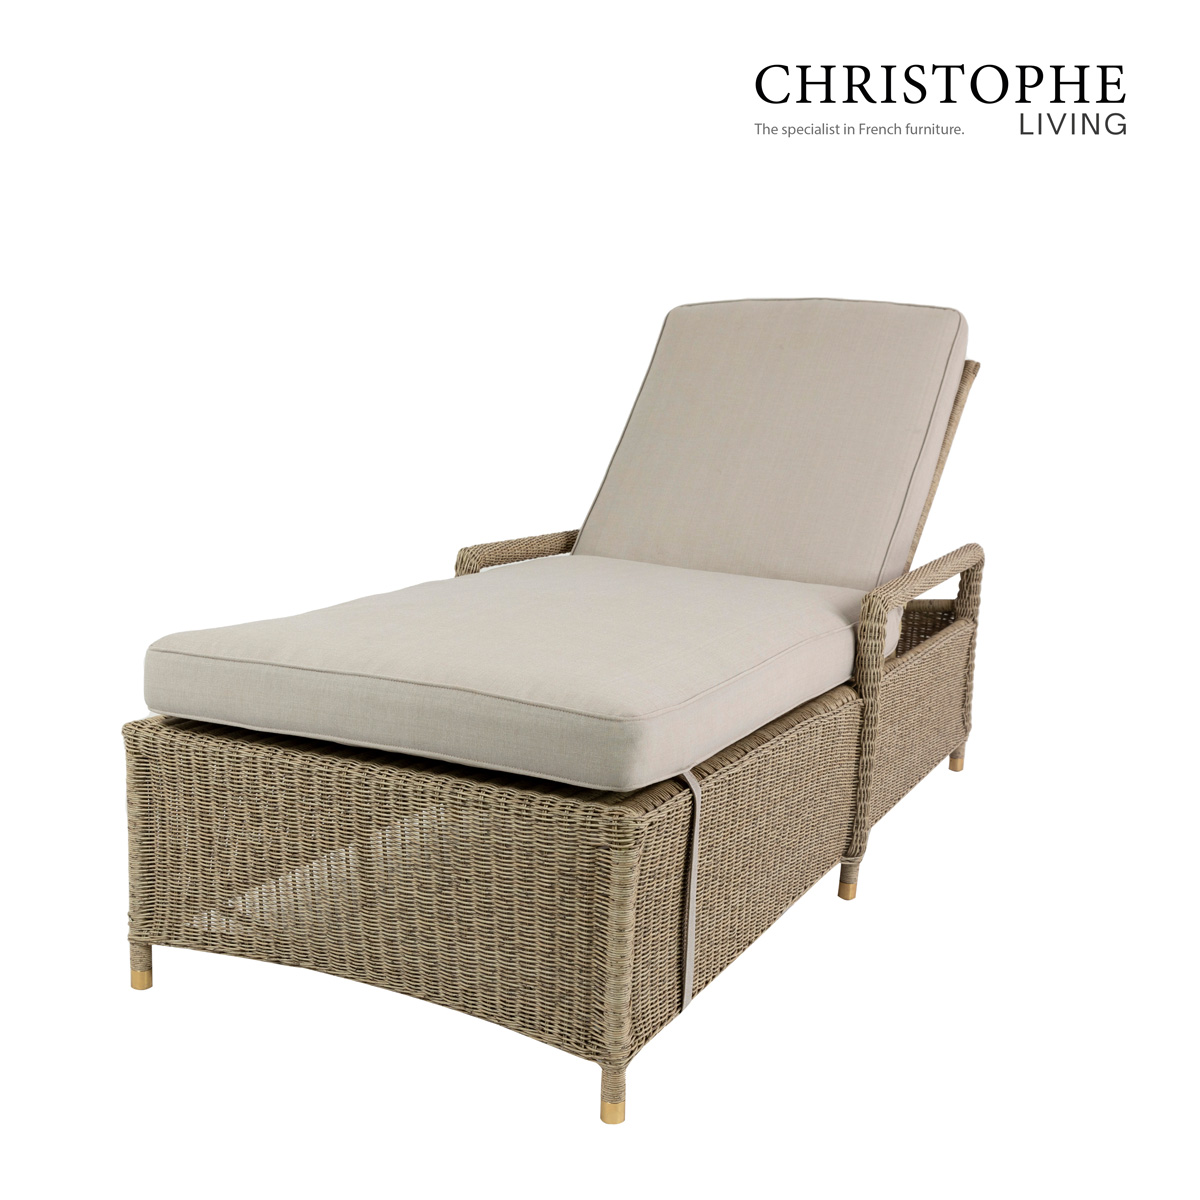 Hyams Provincial Style Sunlounger in Natural Synthetic Rattan and Wicker for Outdoor Patio Use